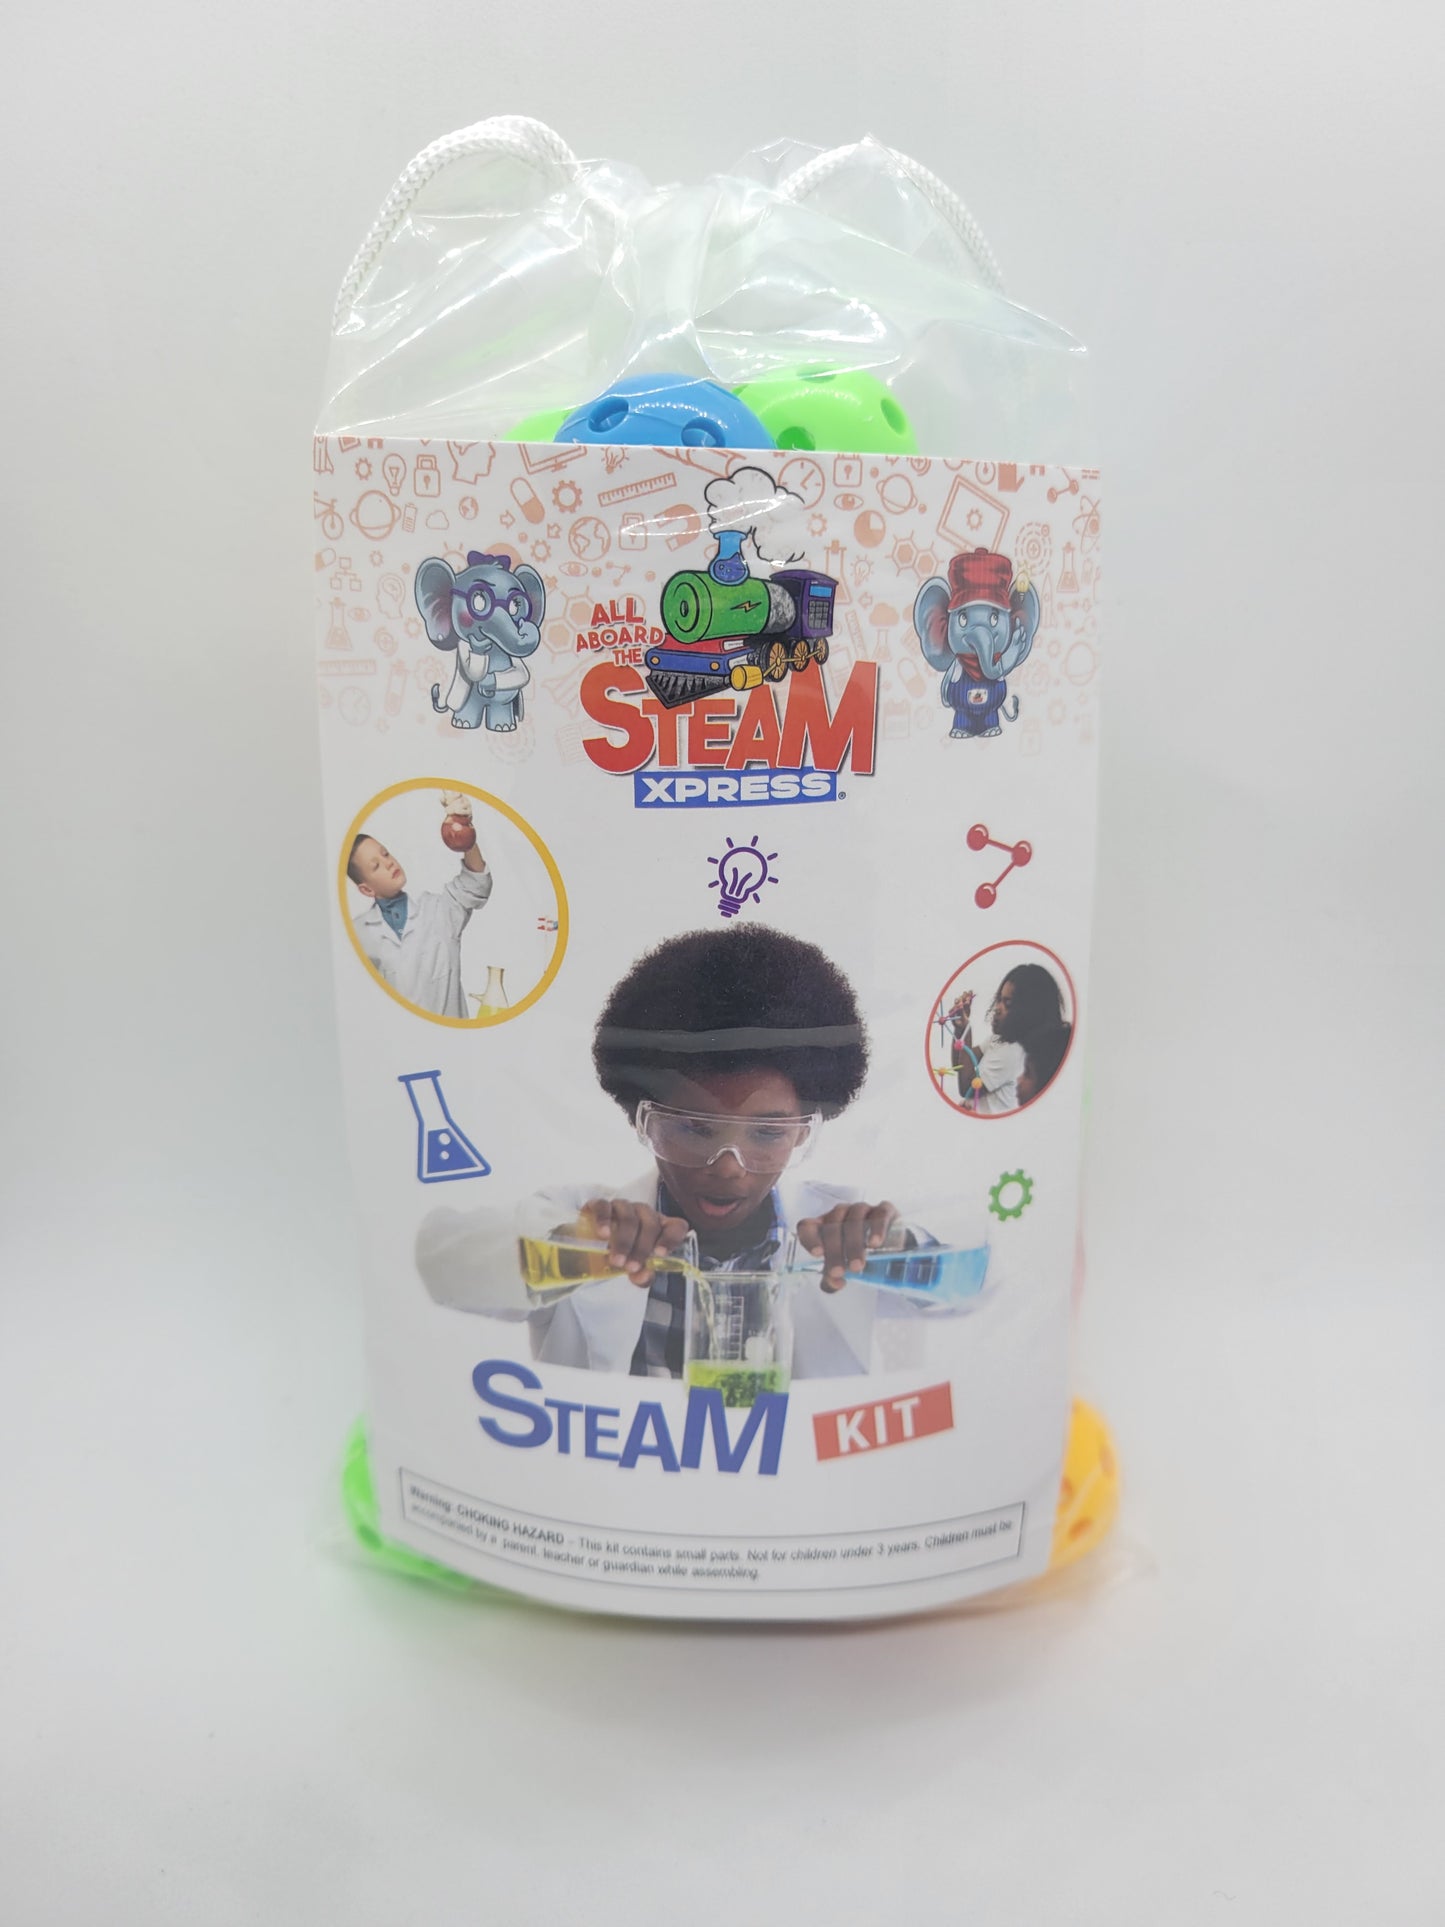 All Aboard the STEAM XPRESS® Engineering Structures XPLORER’S BOX